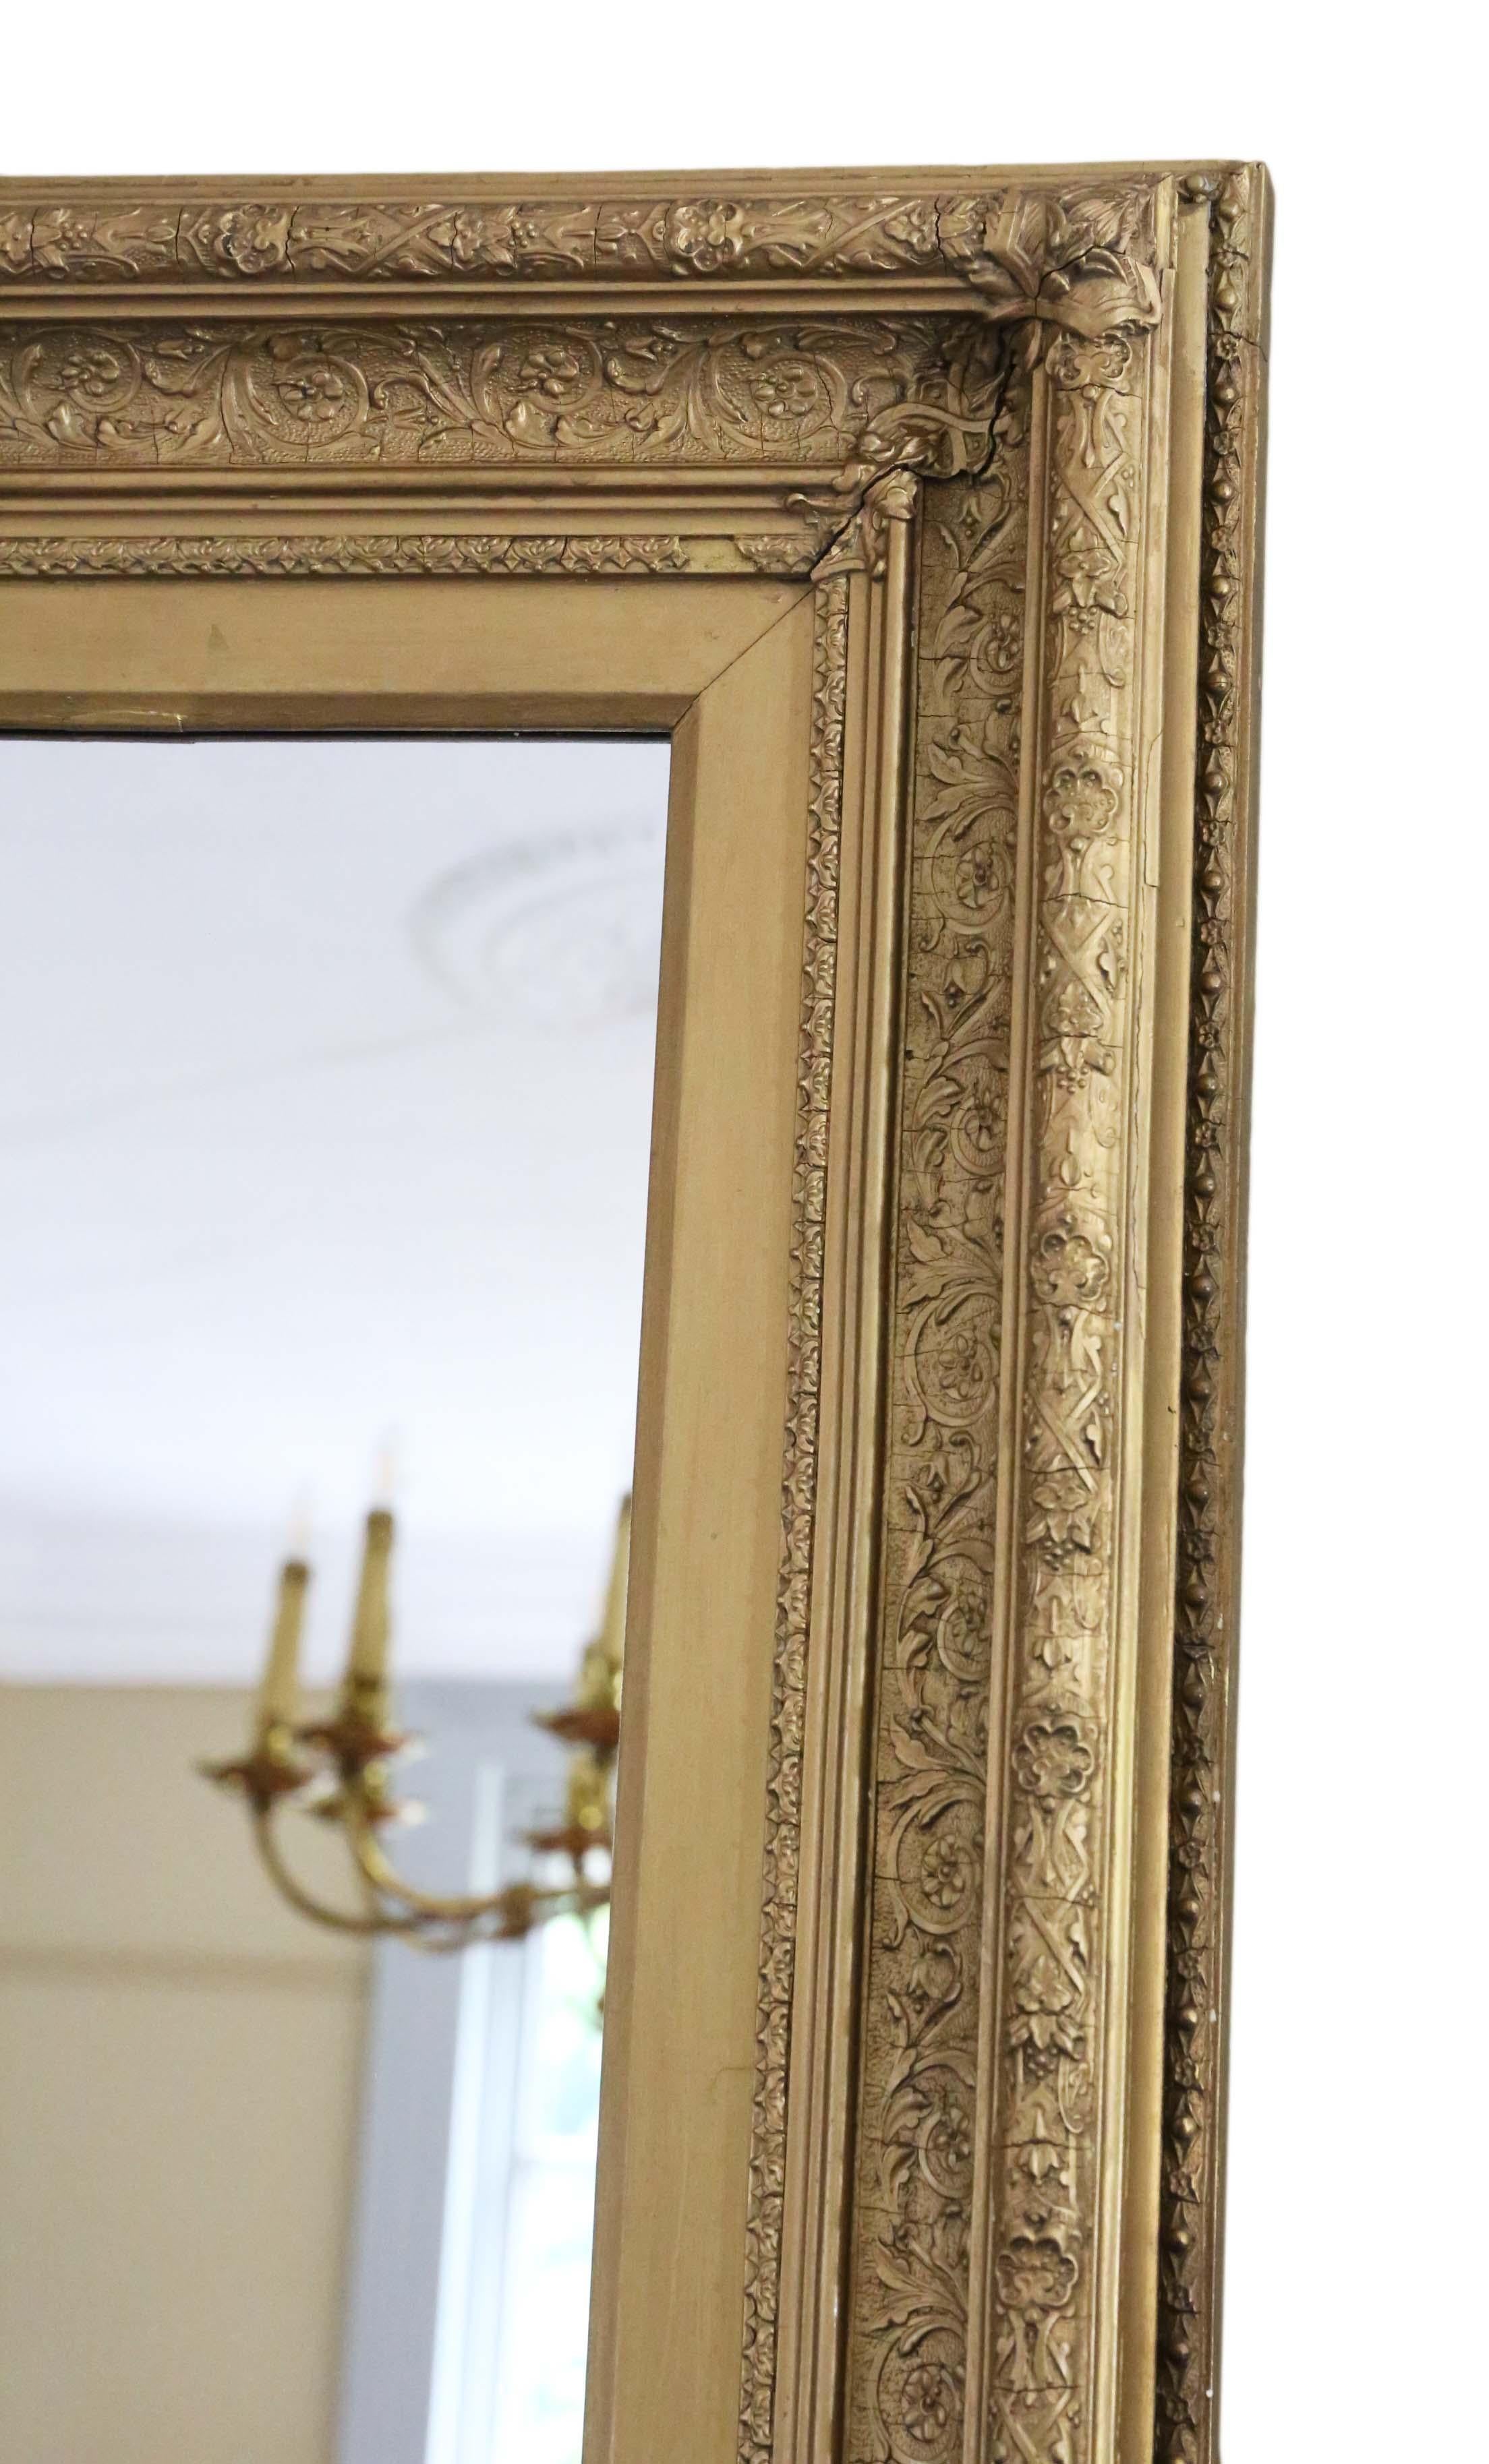 Antique large quality 19th Century gilt overmantle wall mirror. Lovely simplicity charm and elegance. Could be hung in portrait or landscape.

An impressive find, that would look amazing in the right location. No loose joints or woodworm.

Later